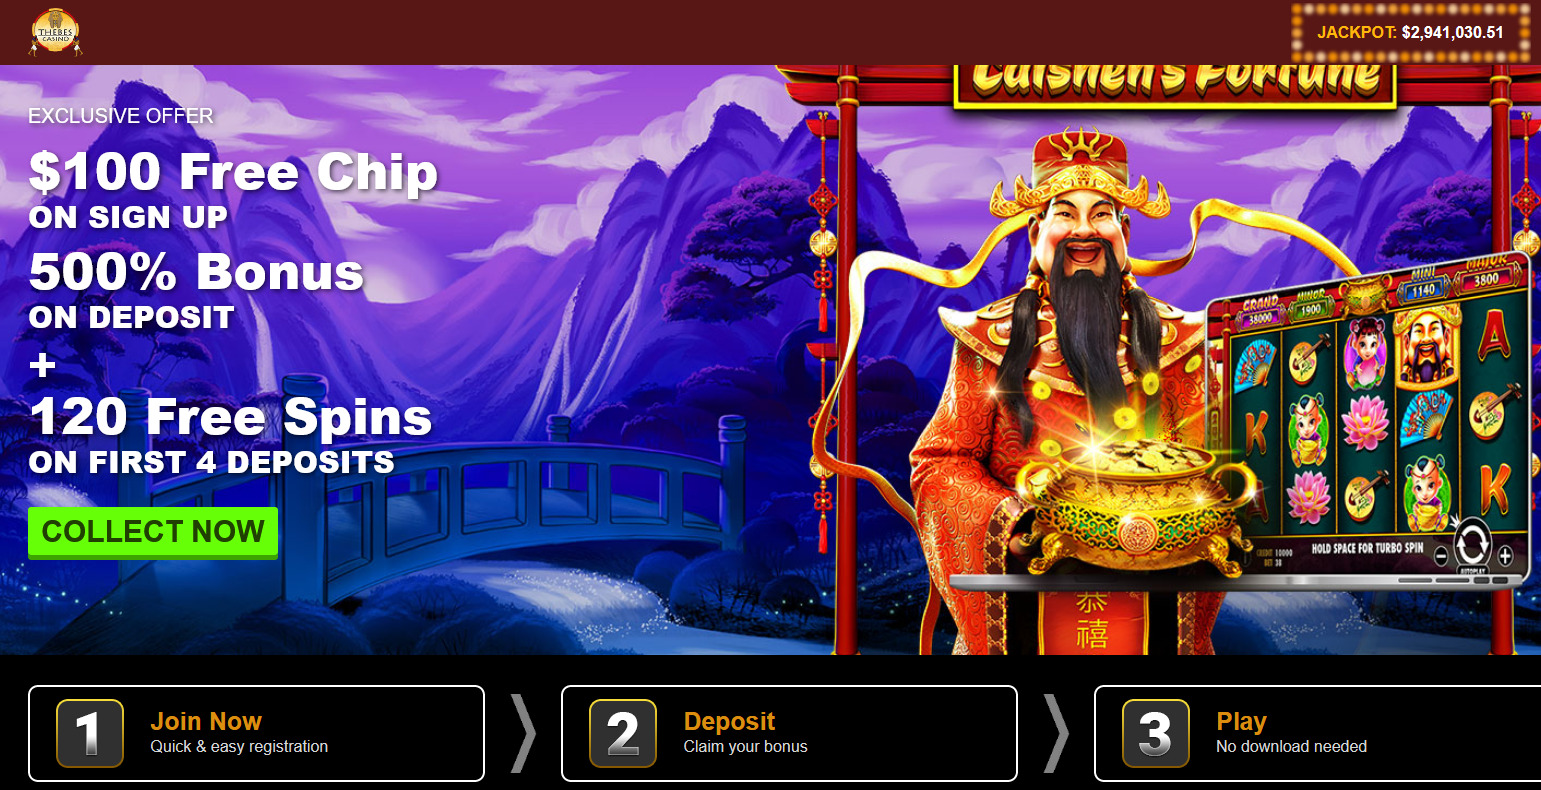 Caishen Left - Jackpot - 100 FC on SU + 480 Free Spins on First 4 Dep